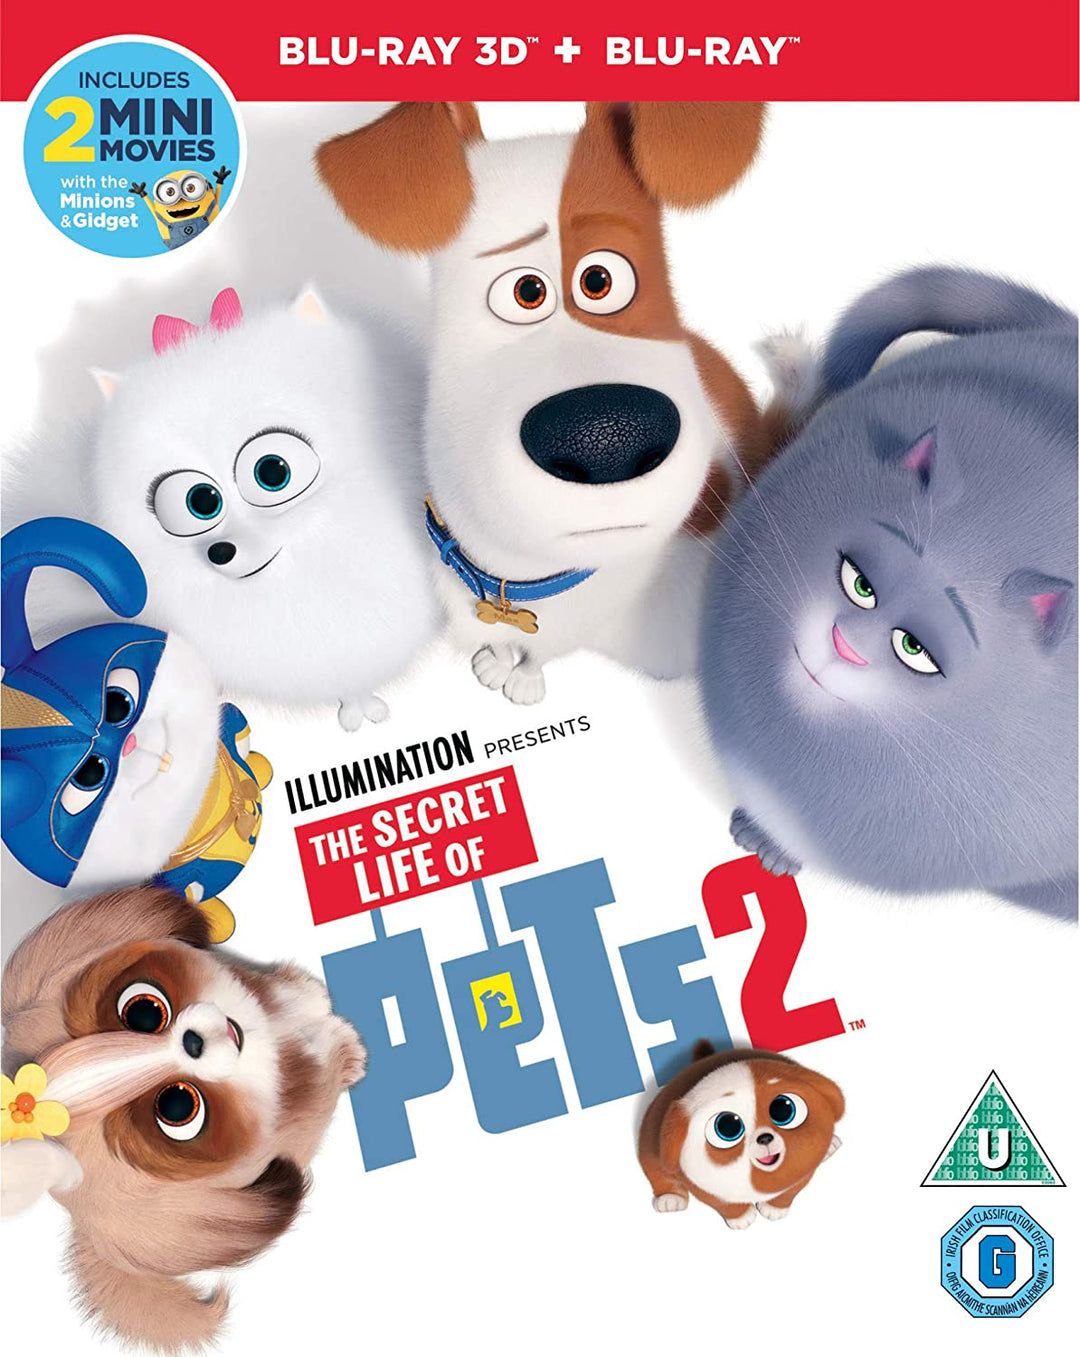 The Secret Life of Pets 2 - Family/Comedy [Blu-Ray]